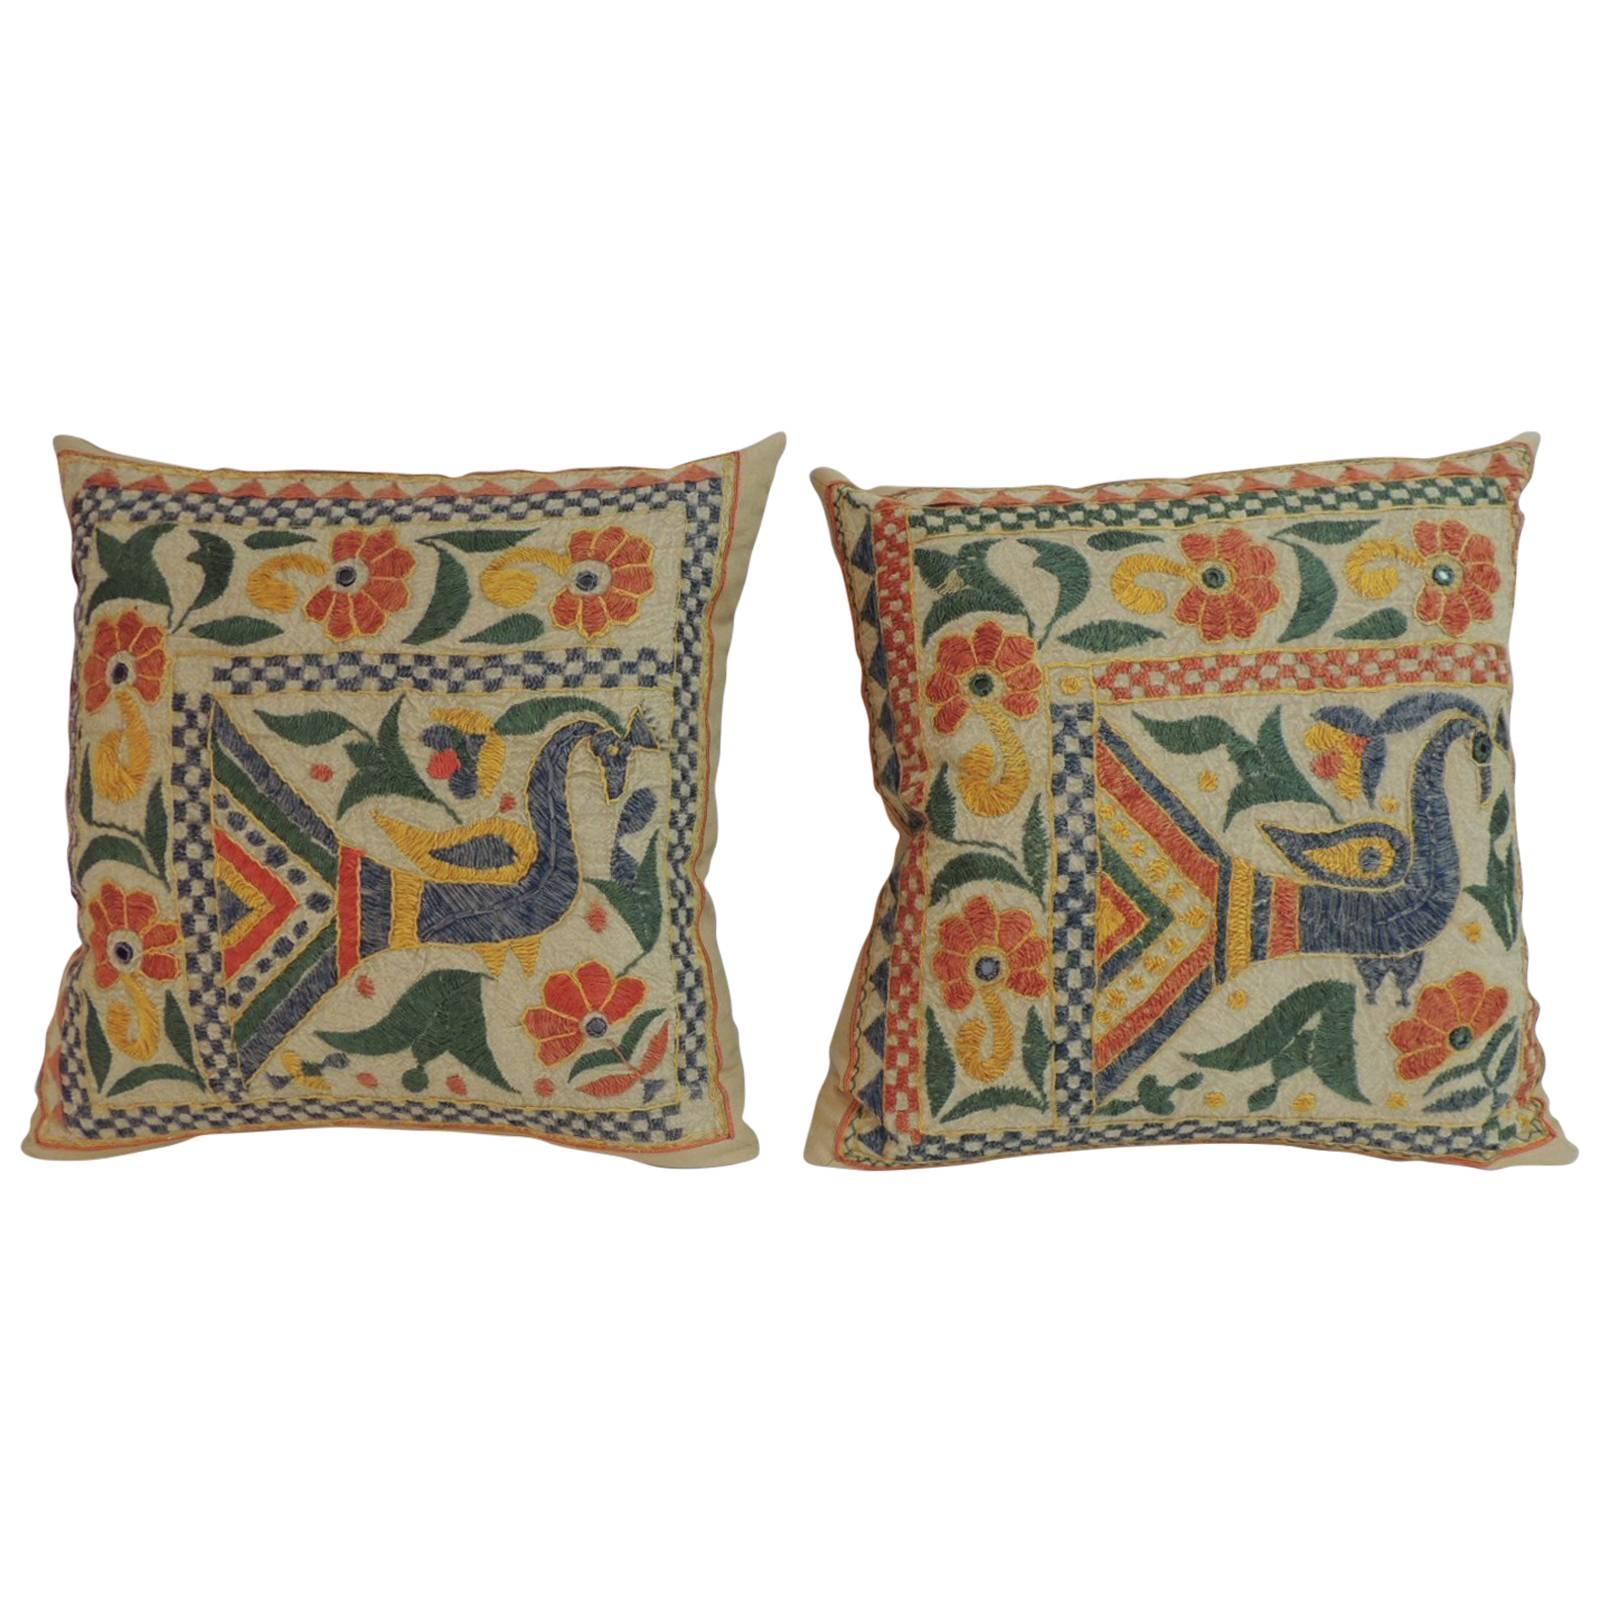 Pair of 19th Century Indian Hand Embroidery Decorative Pillows